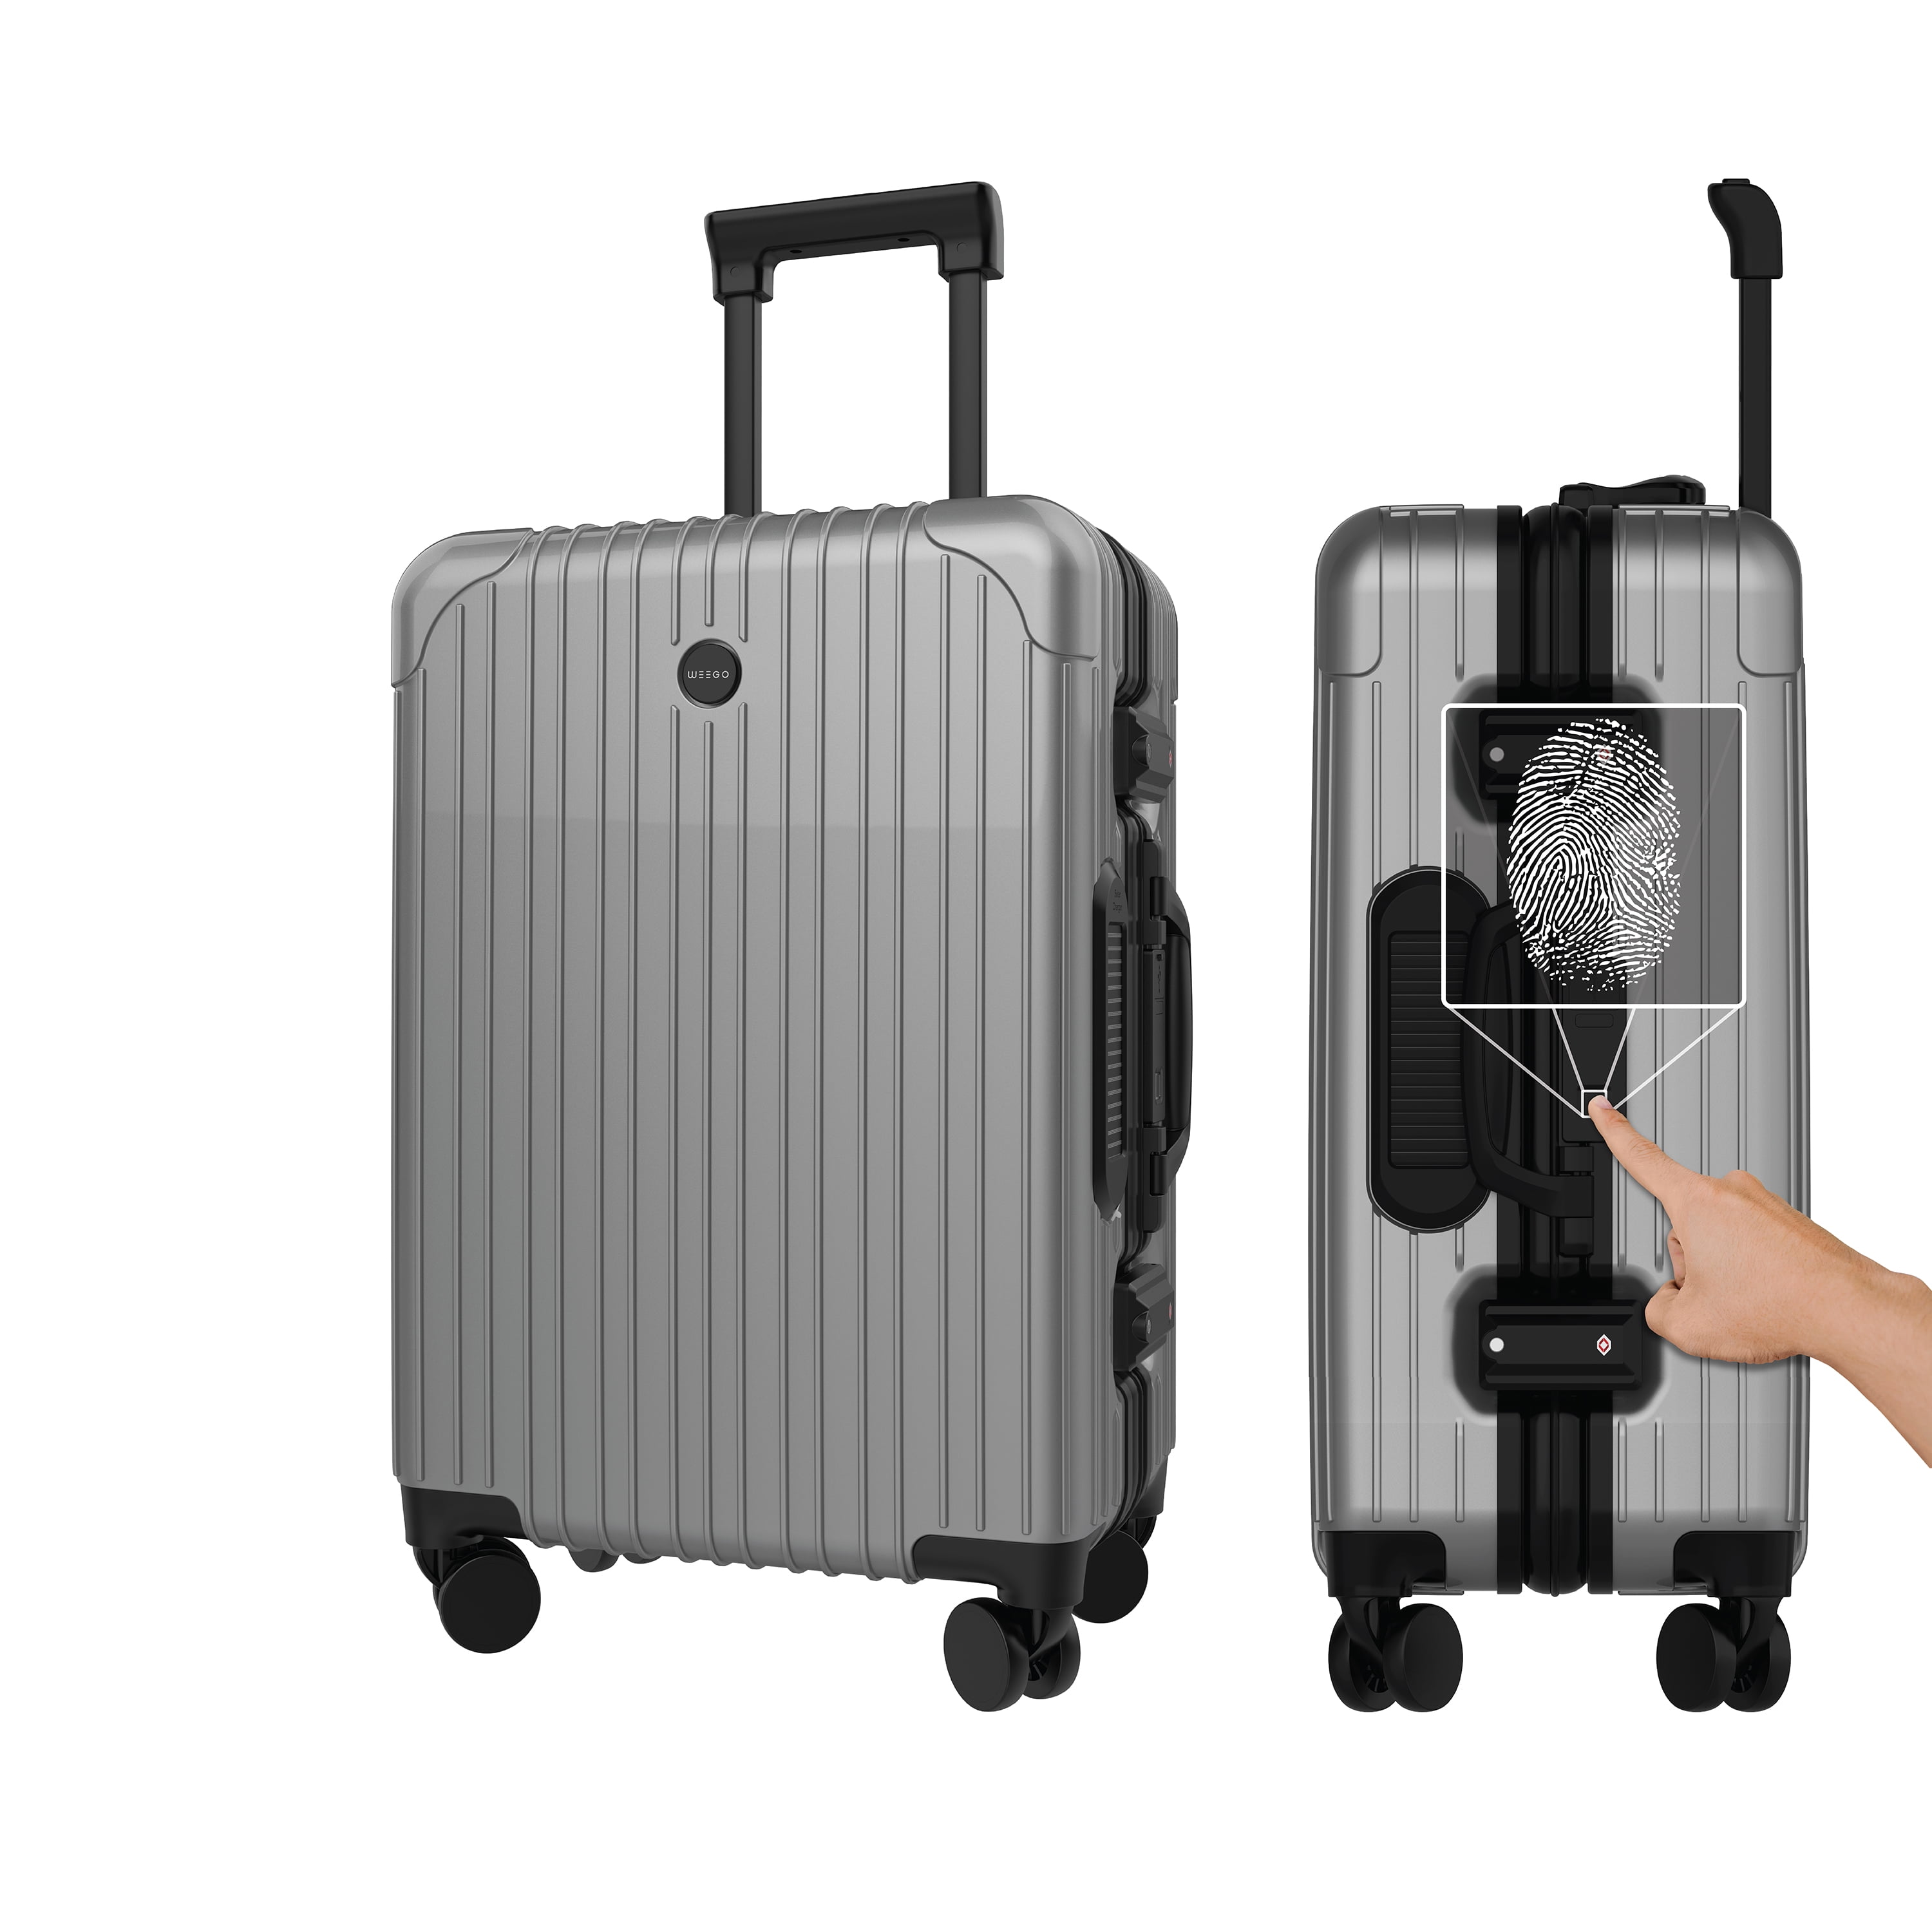 Renegade 24-Inch Medium Hard-Side Expandable Suitcase | Kenneth Cole